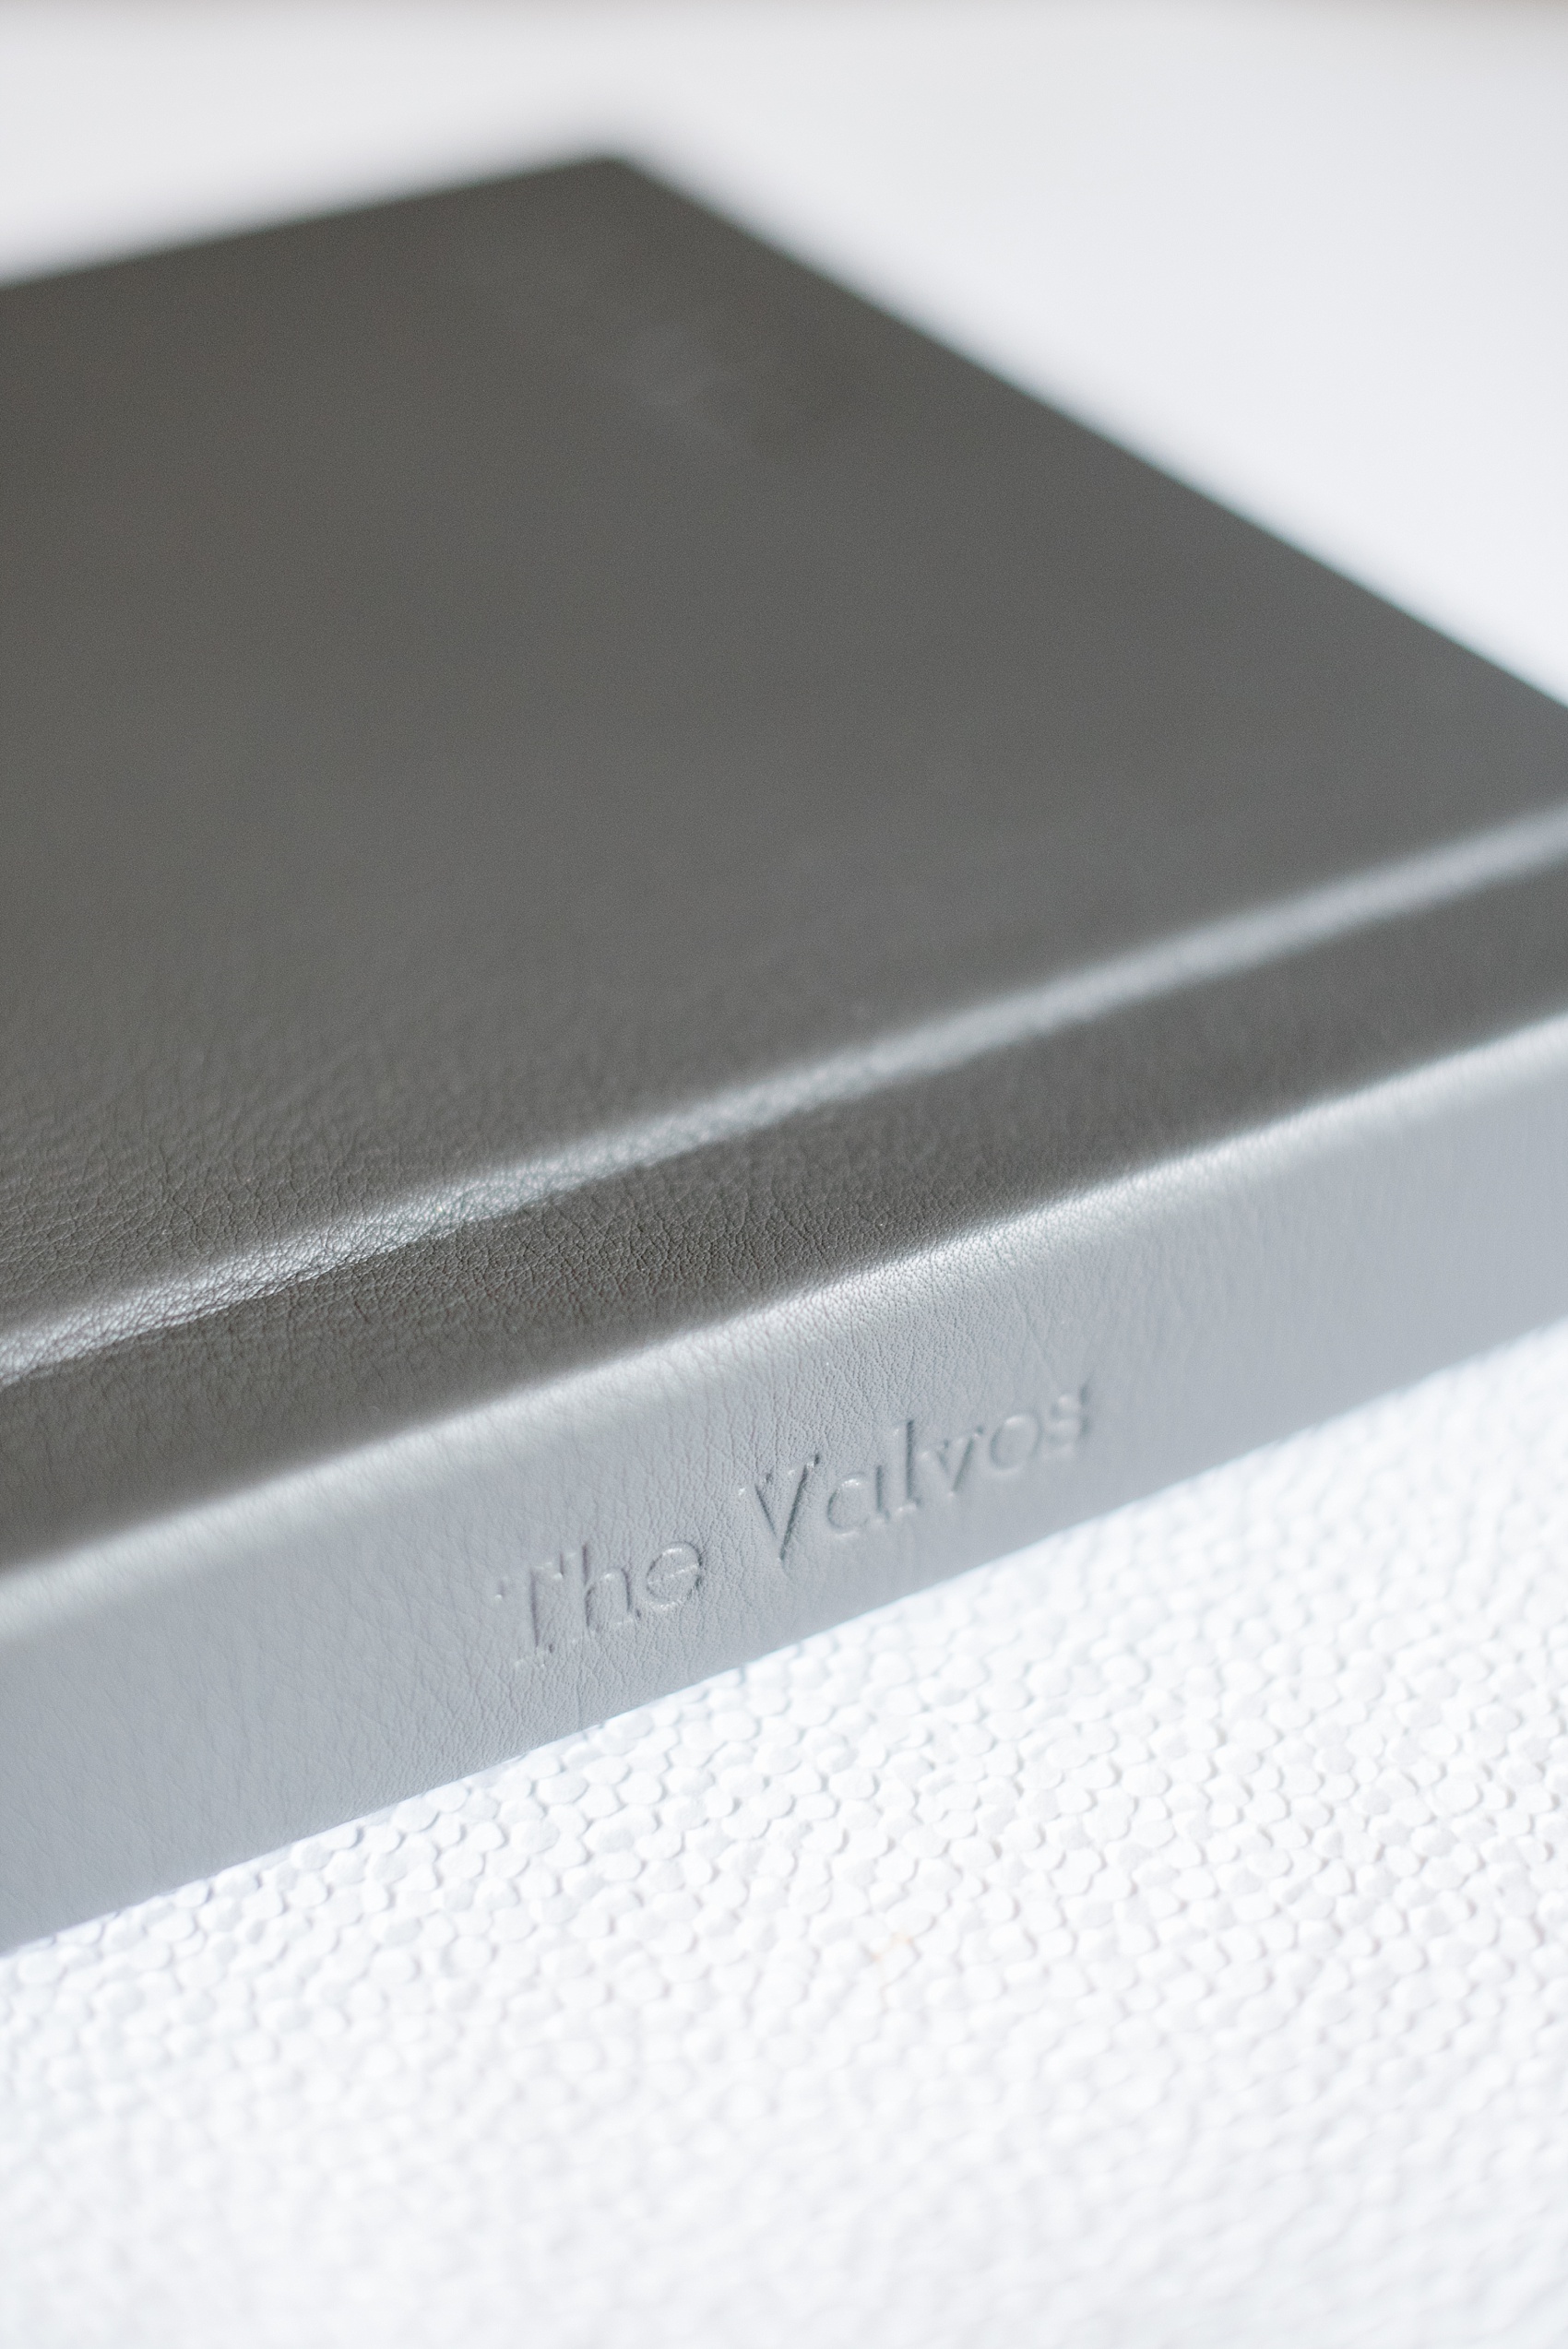 Mikkel Paige Photography grey leather wedding album book from The Harbor Club at Prime on Long Island.